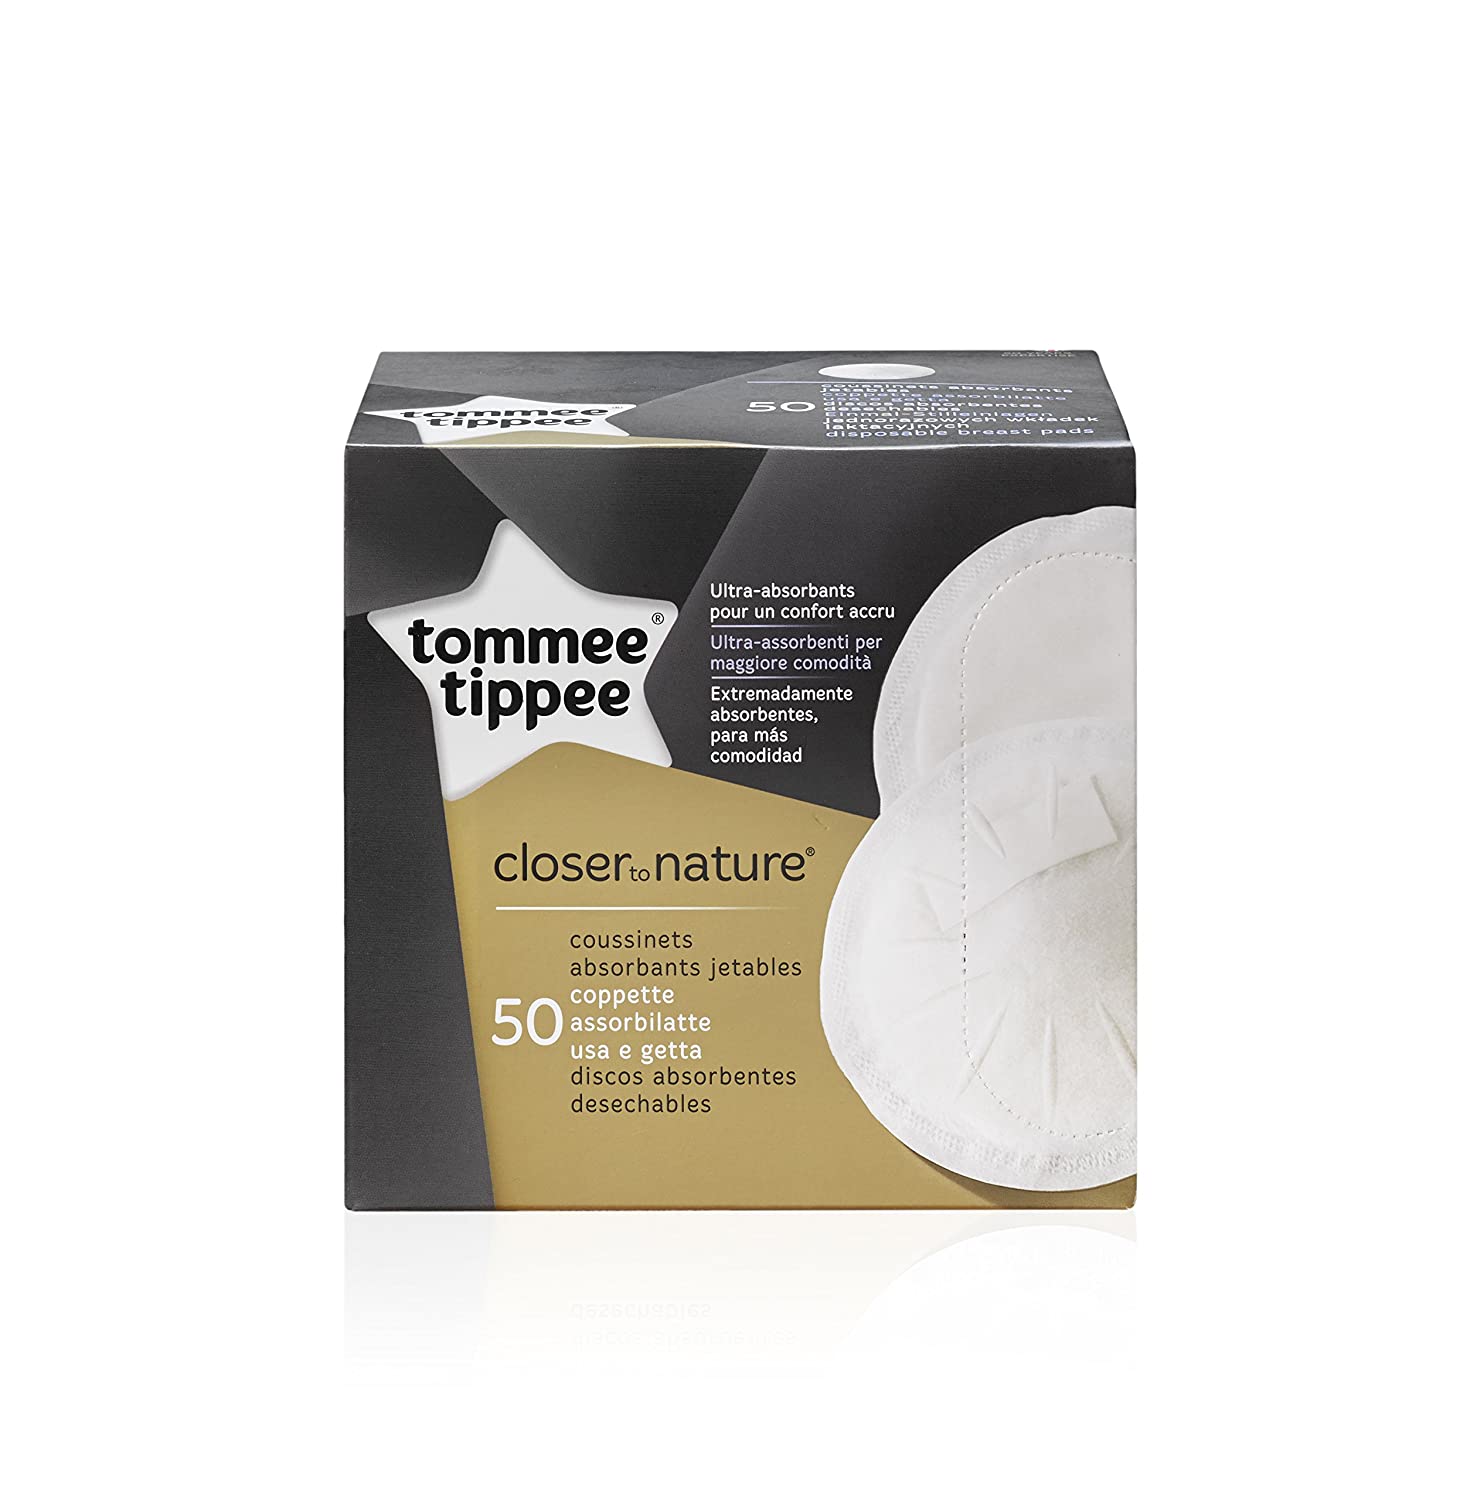 Tommee Tippee Closer to Nature Disposable Nursing Pads